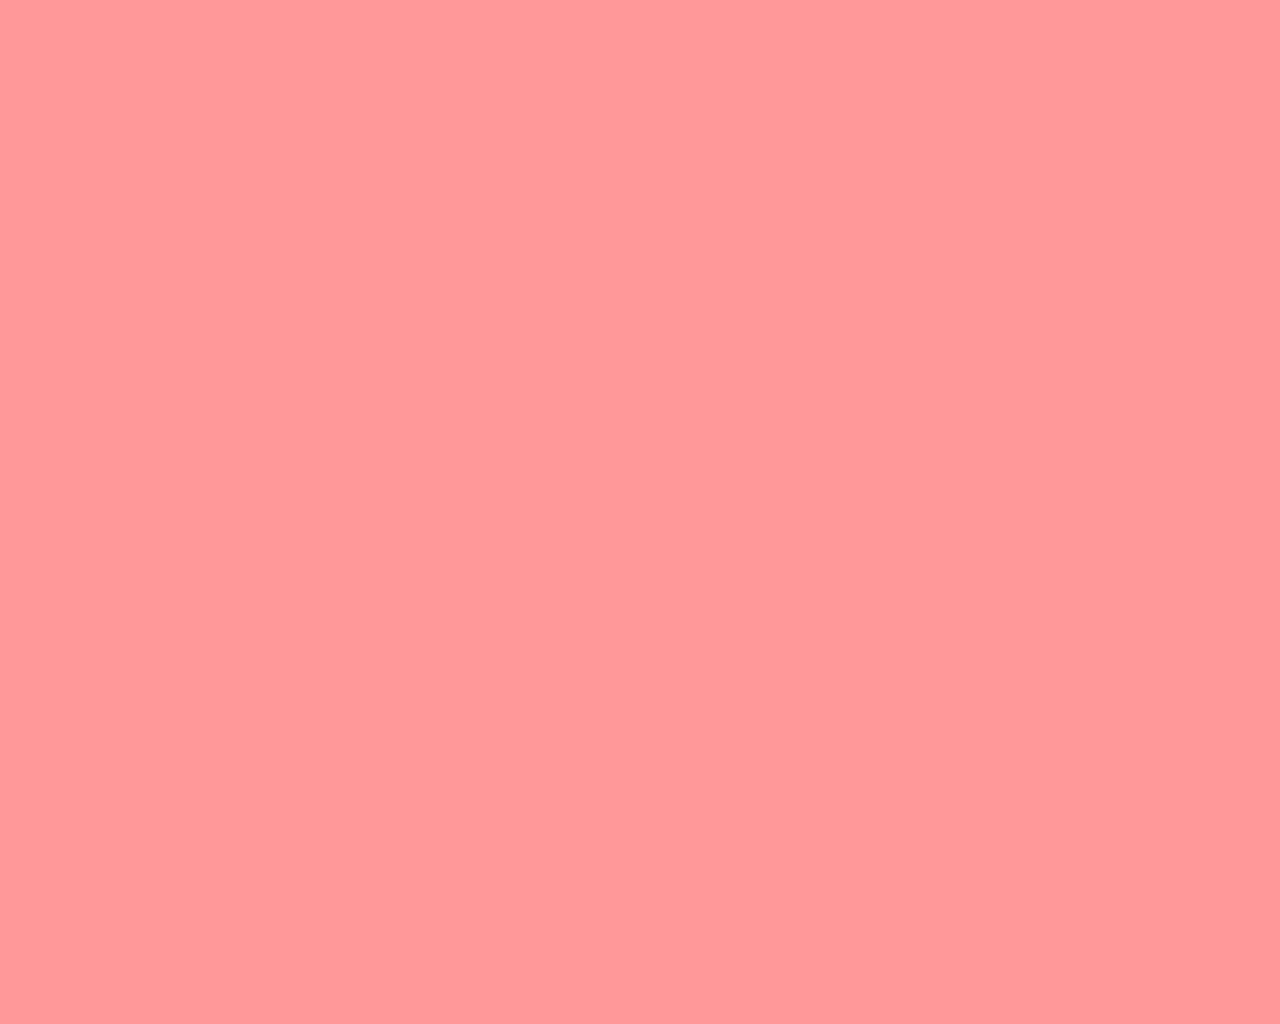 Free download 1280x1024 Light Salmon Pink Solid Color Background [1280x1024] for your Desktop, Mobile & Tablet. Explore Salmon Colored Wallpaper. King Salmon Wallpaper, Chinook Salmon Wallpaper, Salmon Fishing Wallpaper